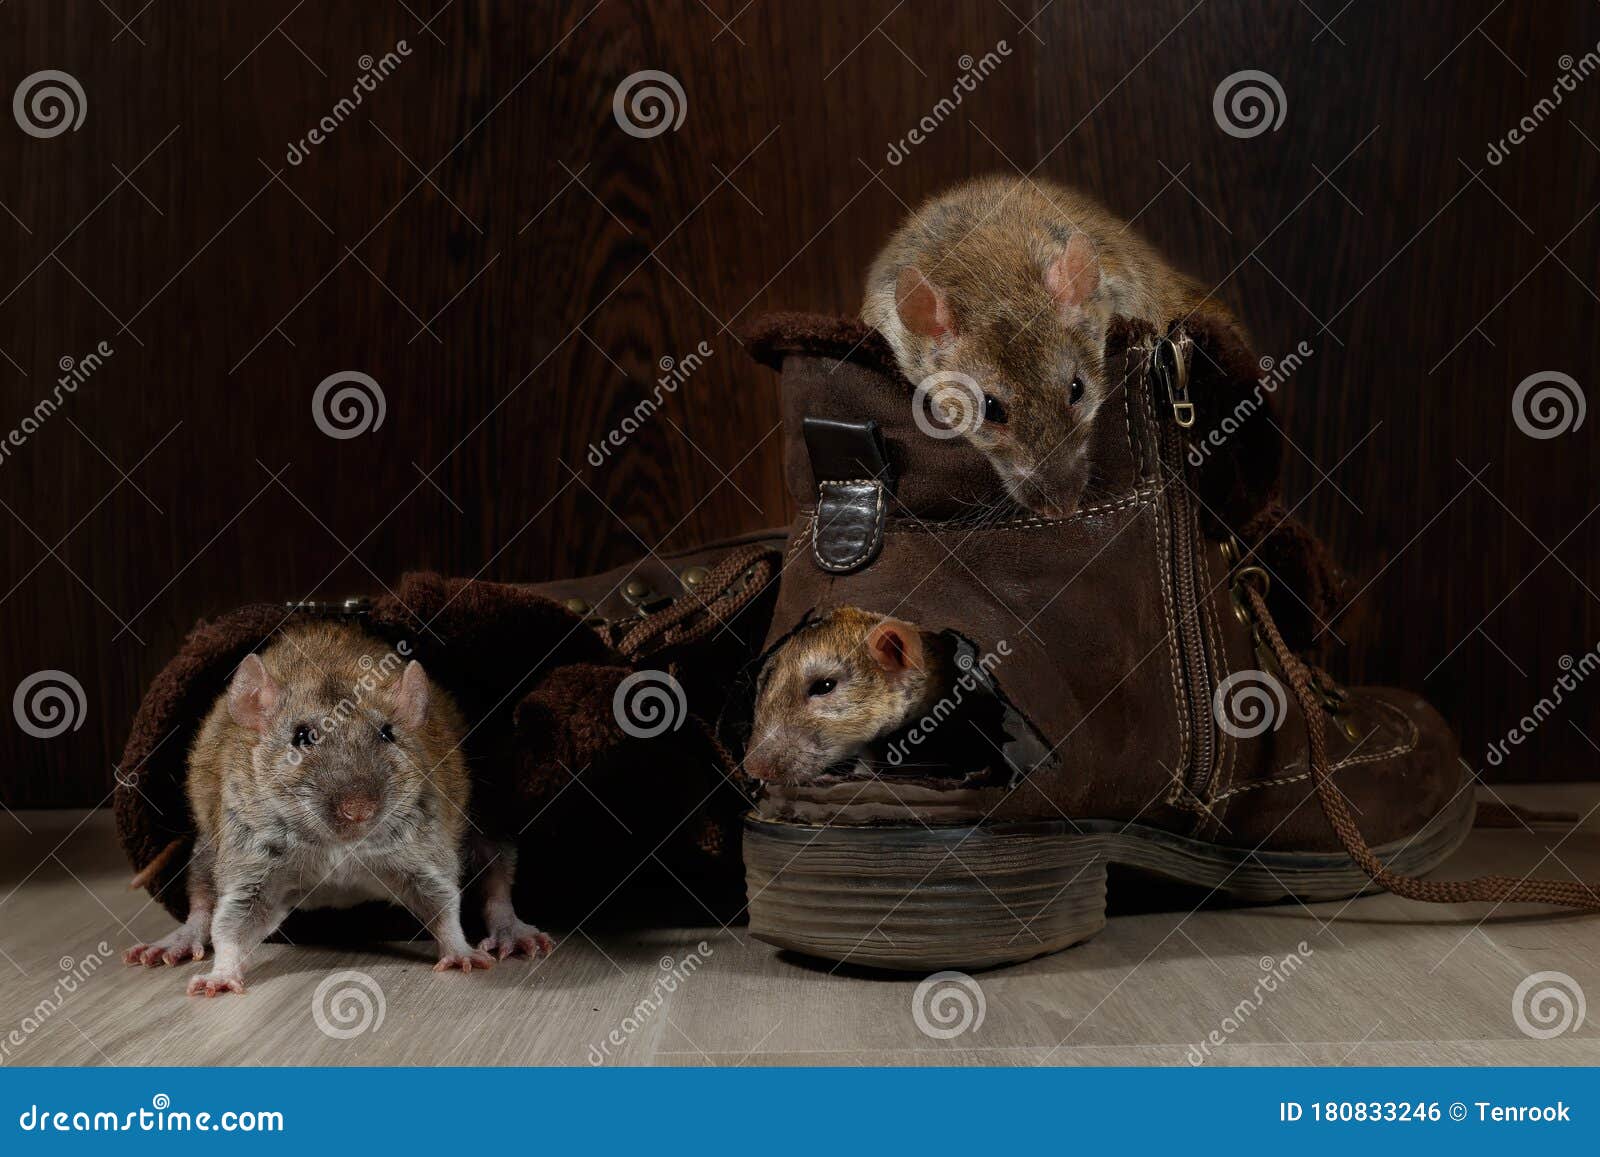 close-up three rats climb inside brown shoes on the gray floors.